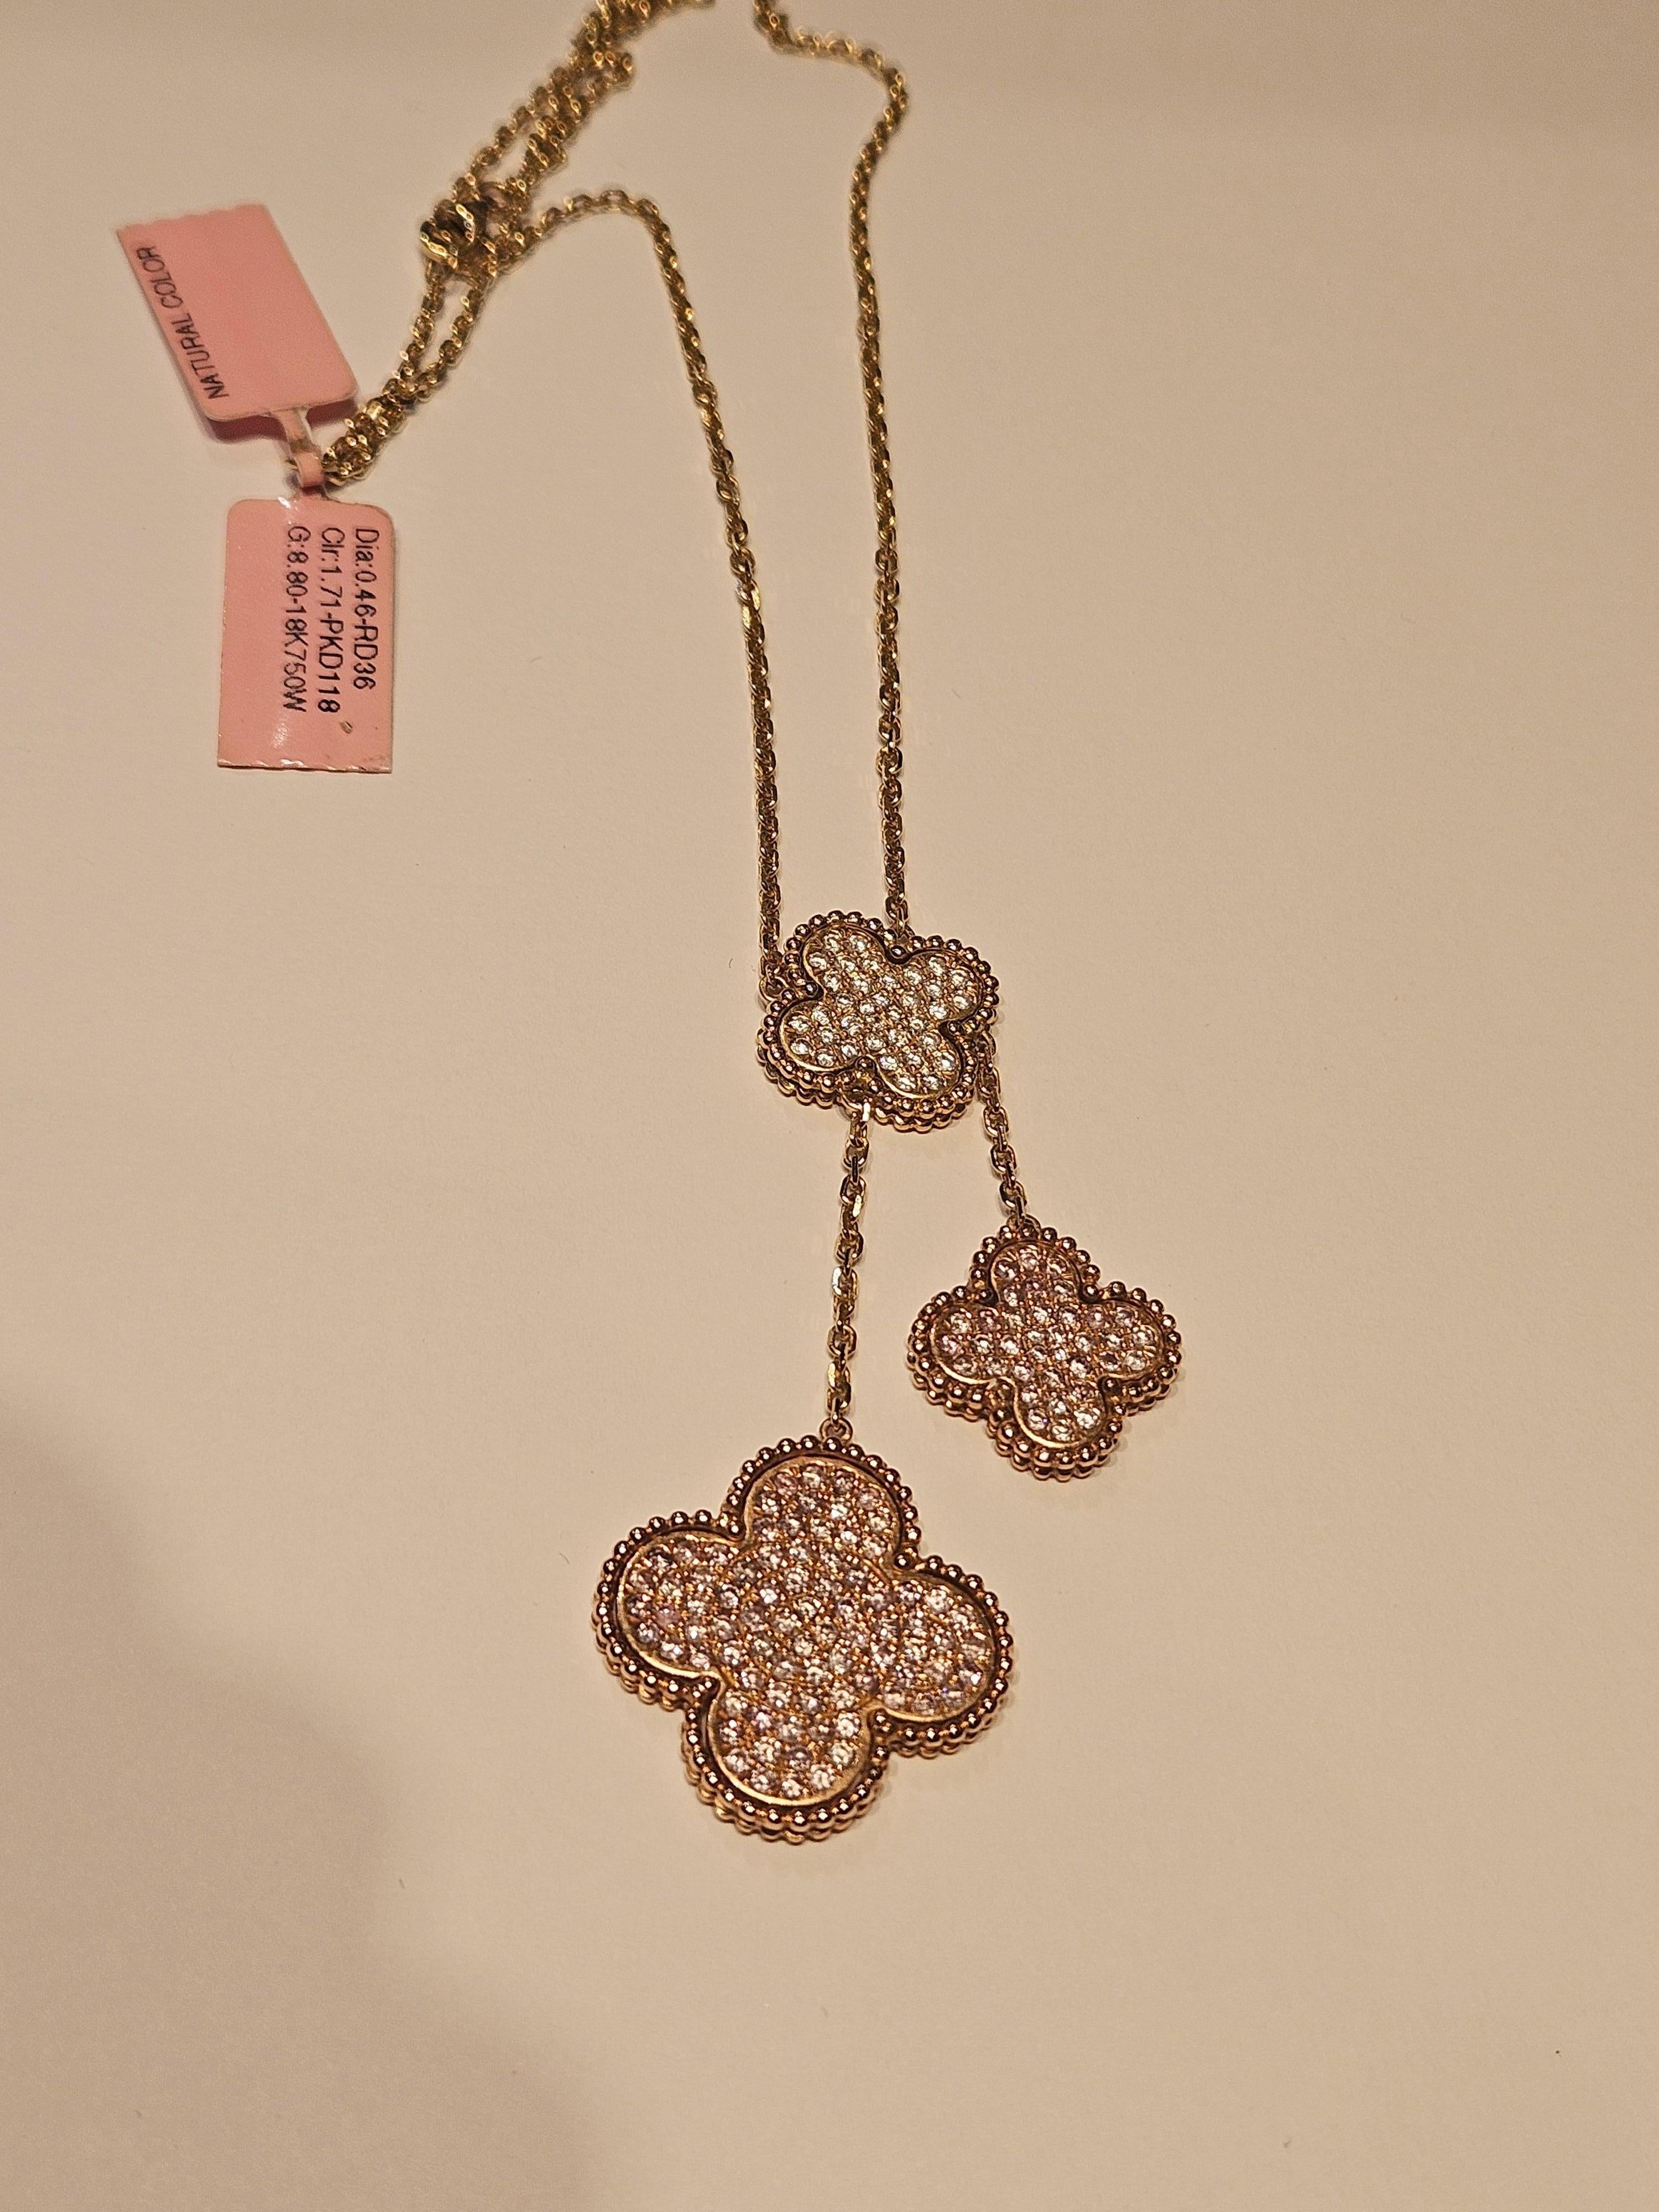 Round Cut NWT $19, 583 Important 18KT Fancy Pink Diamond Clovers w White Diamond Necklace For Sale